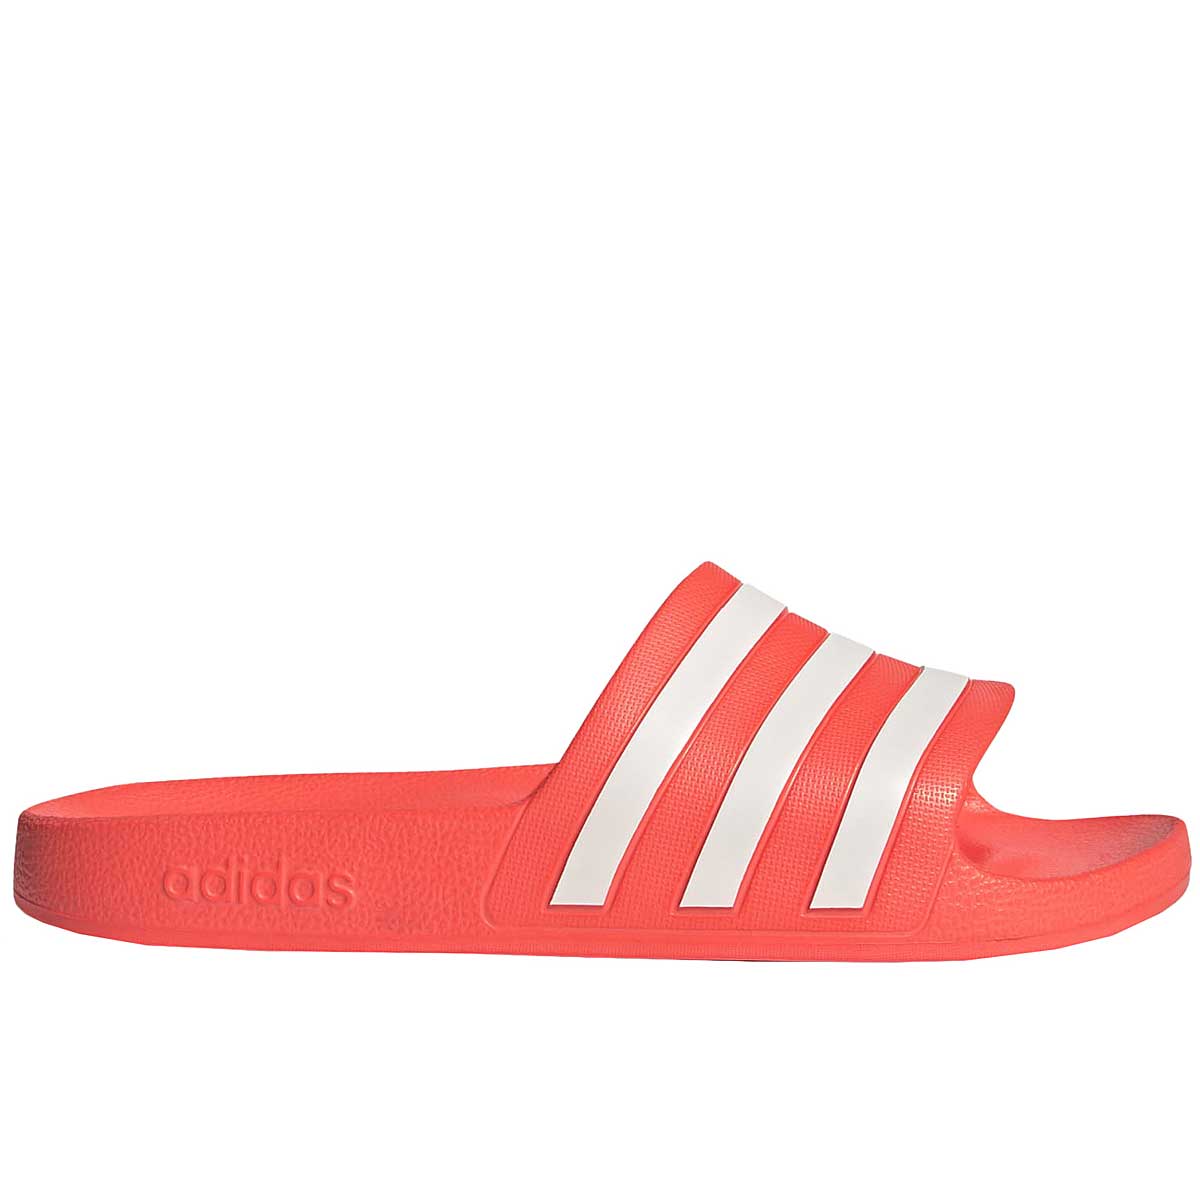 Image of Adidas Adilette, Red/white/red